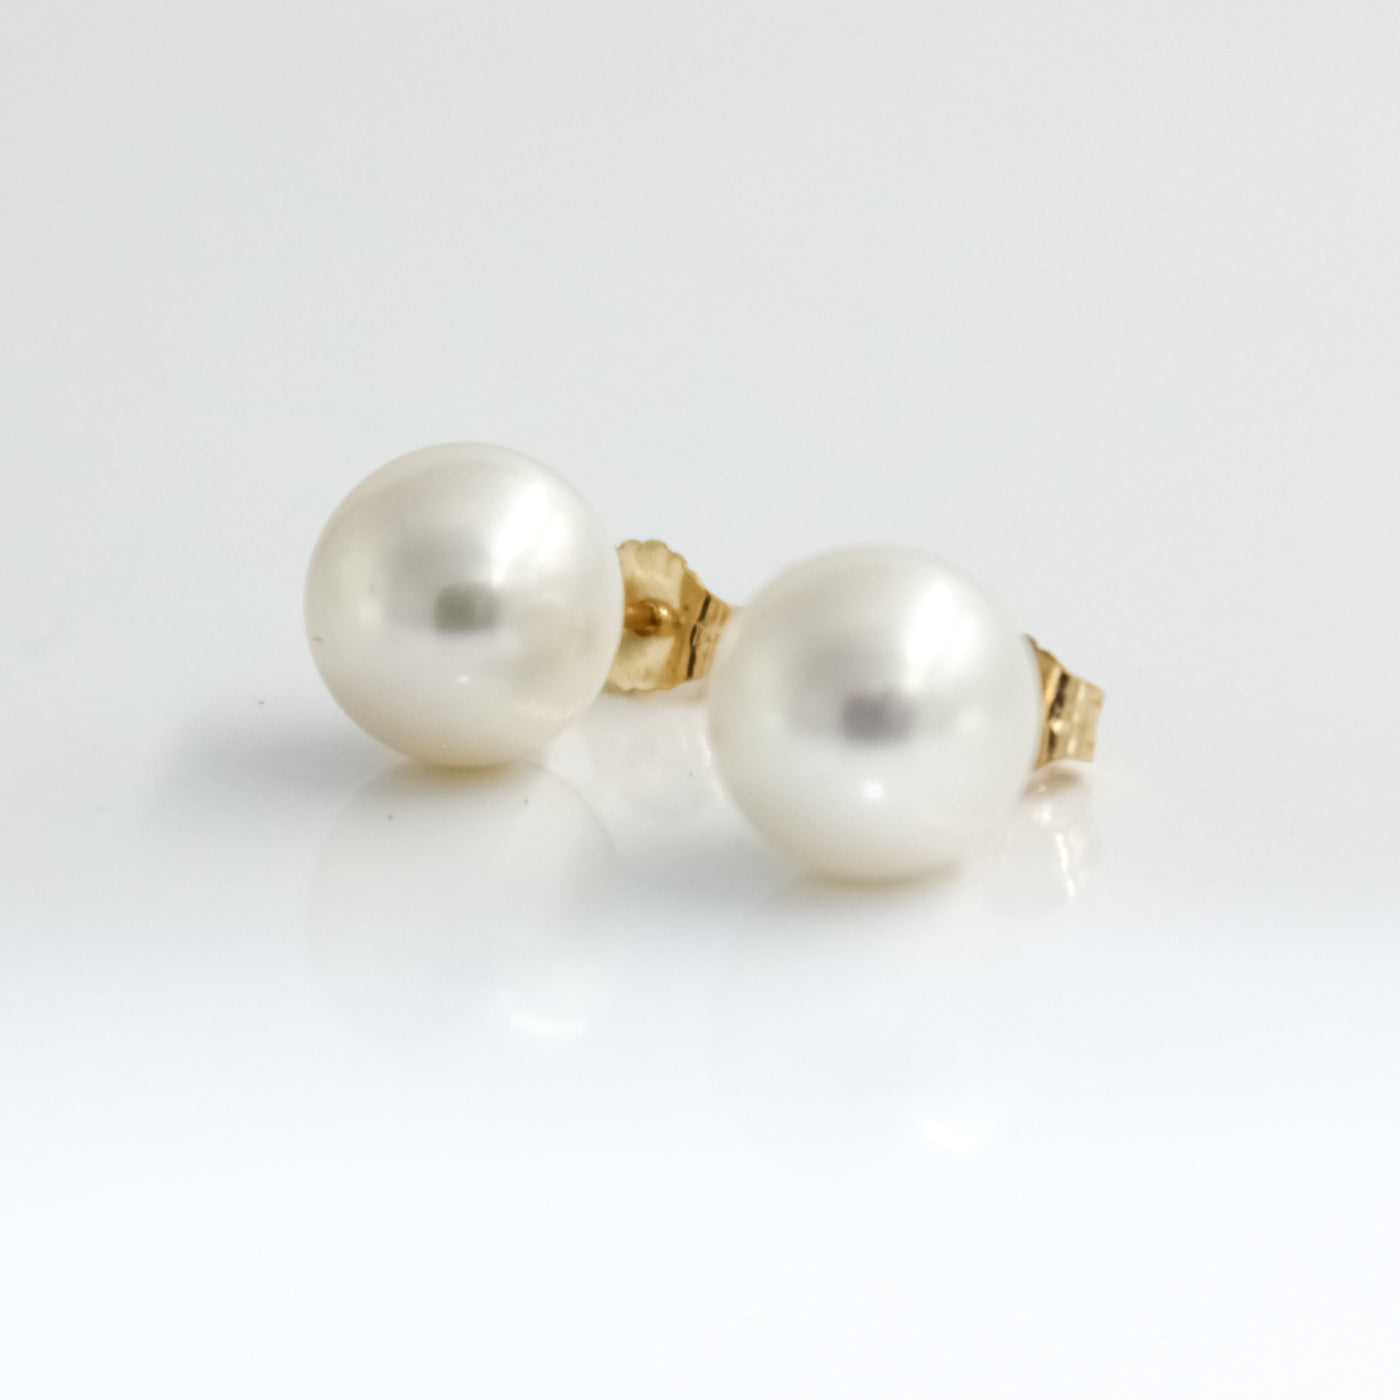 Cultured Freshwater Pear Studs - 14K Yellow Gold